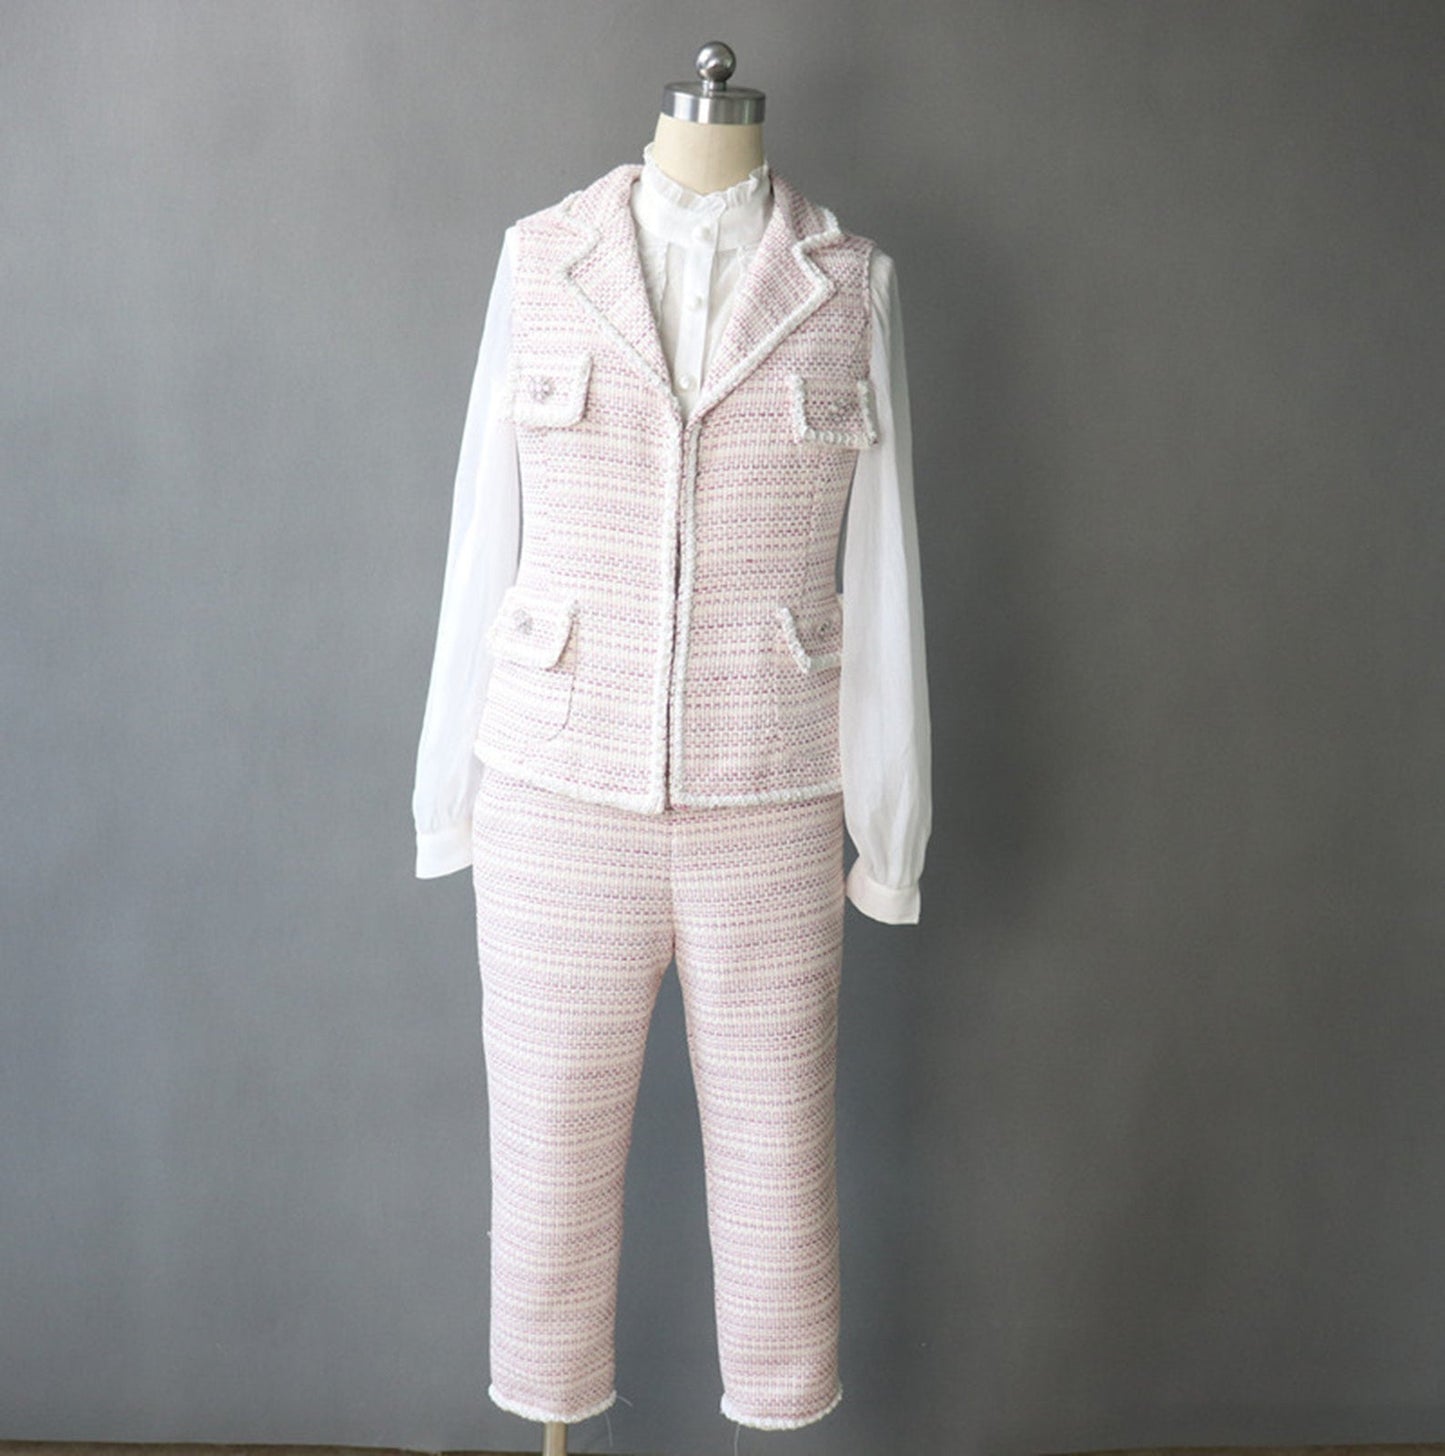 CUSTOM MADE Flower Petal Button Pink Vest Gilet+Shorts/Trousers Suit   UK CUSTOMER SERVICE!  CUSTOM MADE Flower Petal Button Pink Vest Gilet+Shorts/Trousers Suit - flower pink button and front pocket. Our tailor will make exact shape and design as per customer requirement.